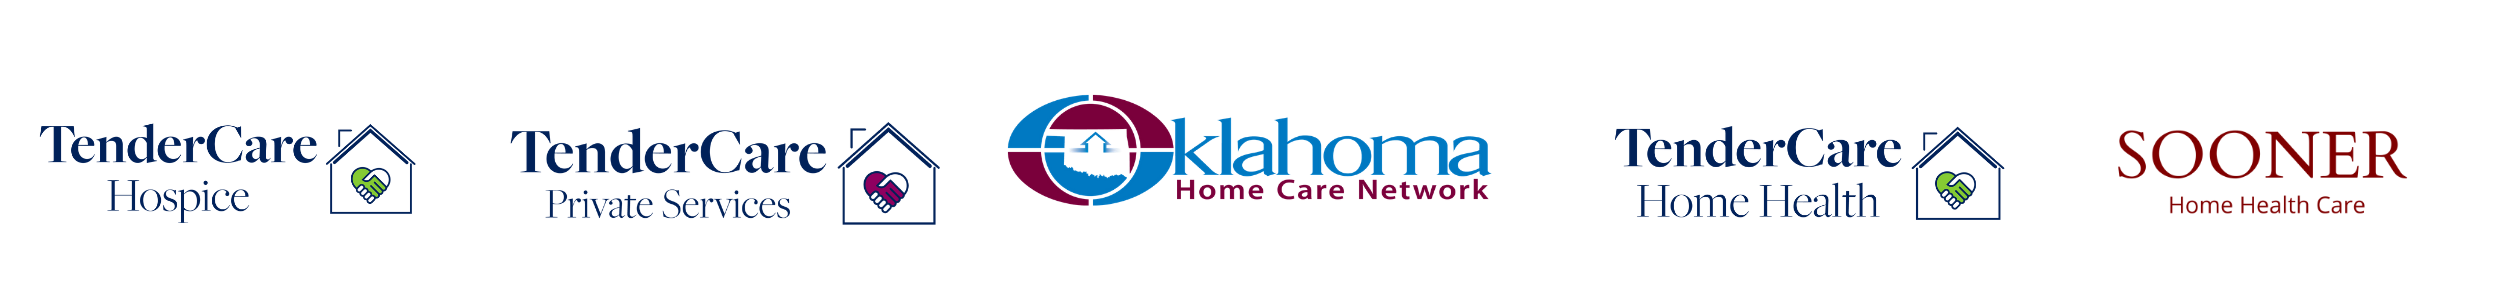 Tender Care Home Health & Hospice (Utah), a Mission Healthcare Company